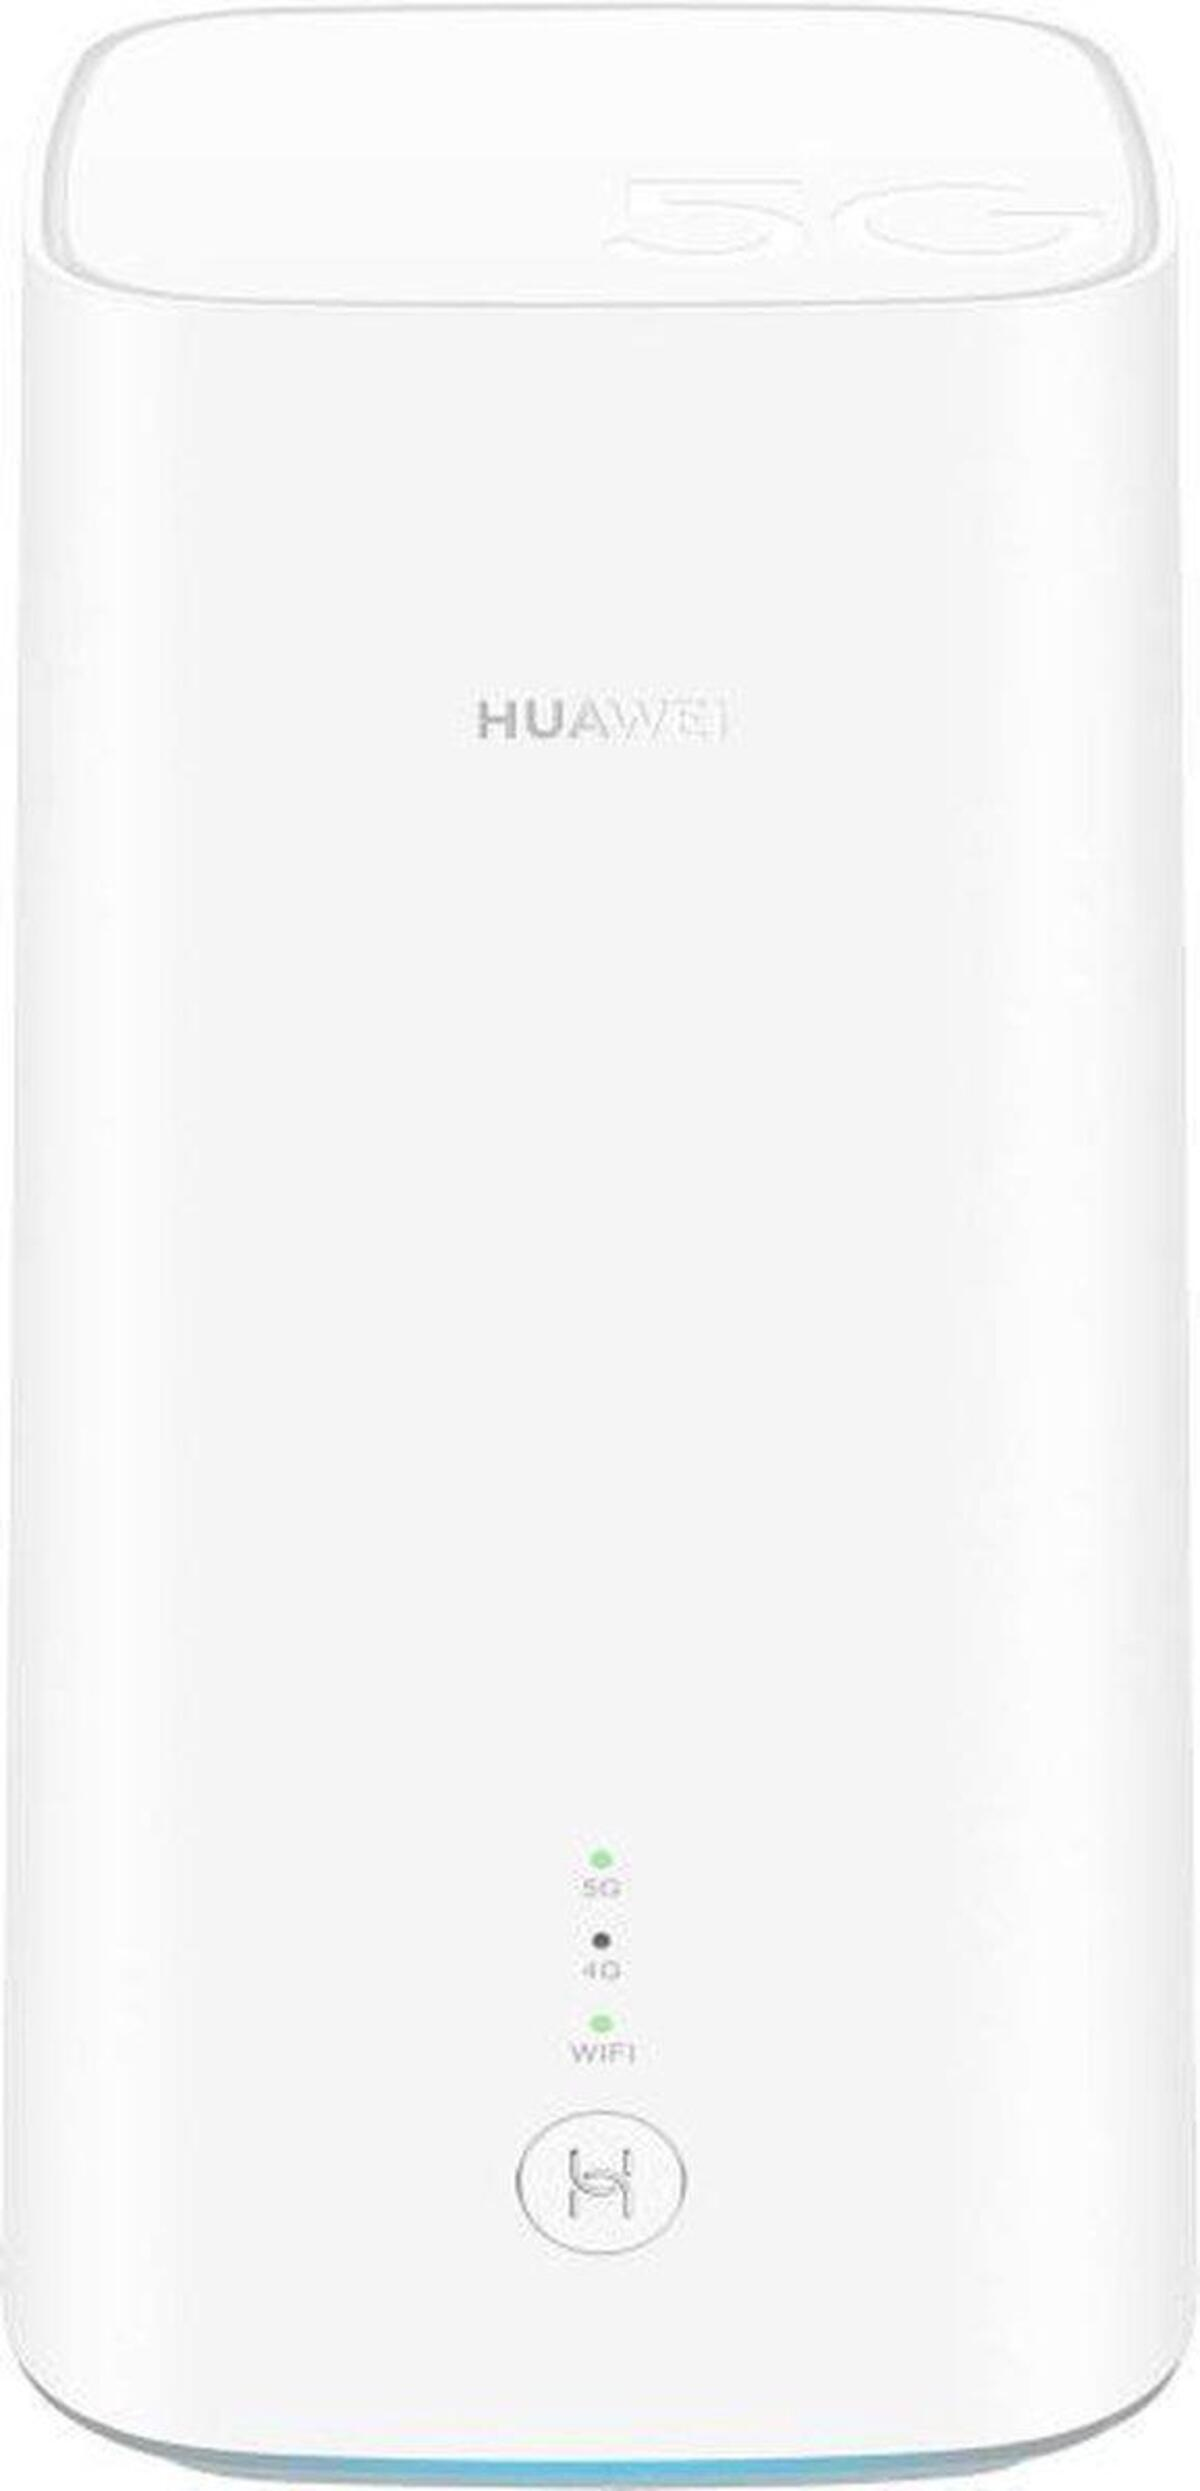 Pro Router Router 2 5G HUAWEI CPE Wireless